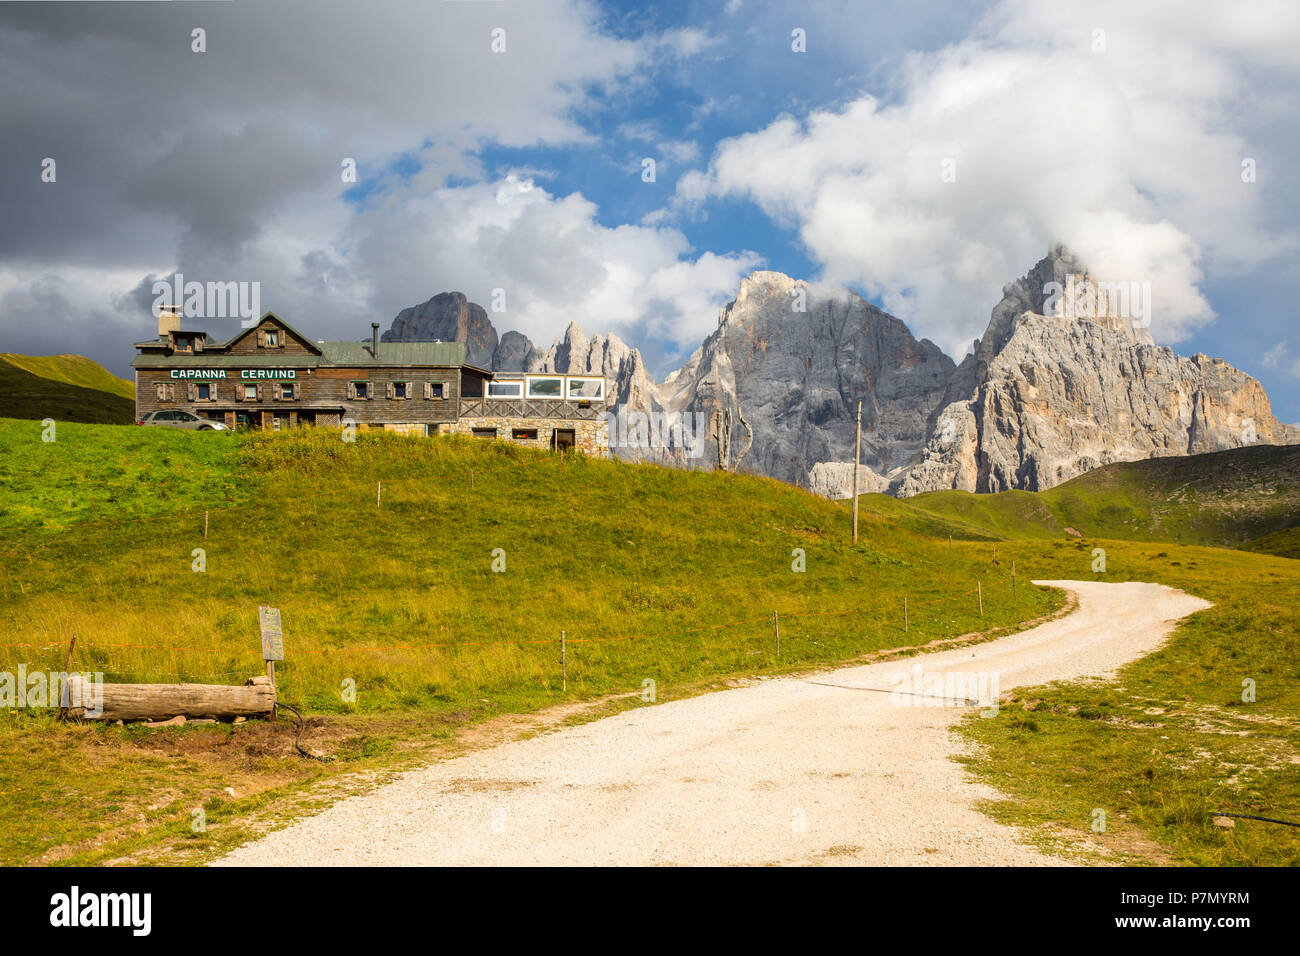 Path to Capanne Cervino refuge and the Pala group, Pala group, Pale di San Martino, Rolle Pass, Passo Rolle, San Martino di Castrozza, Trento province, Trentino-Alto Adige, Italy, Stock Photo